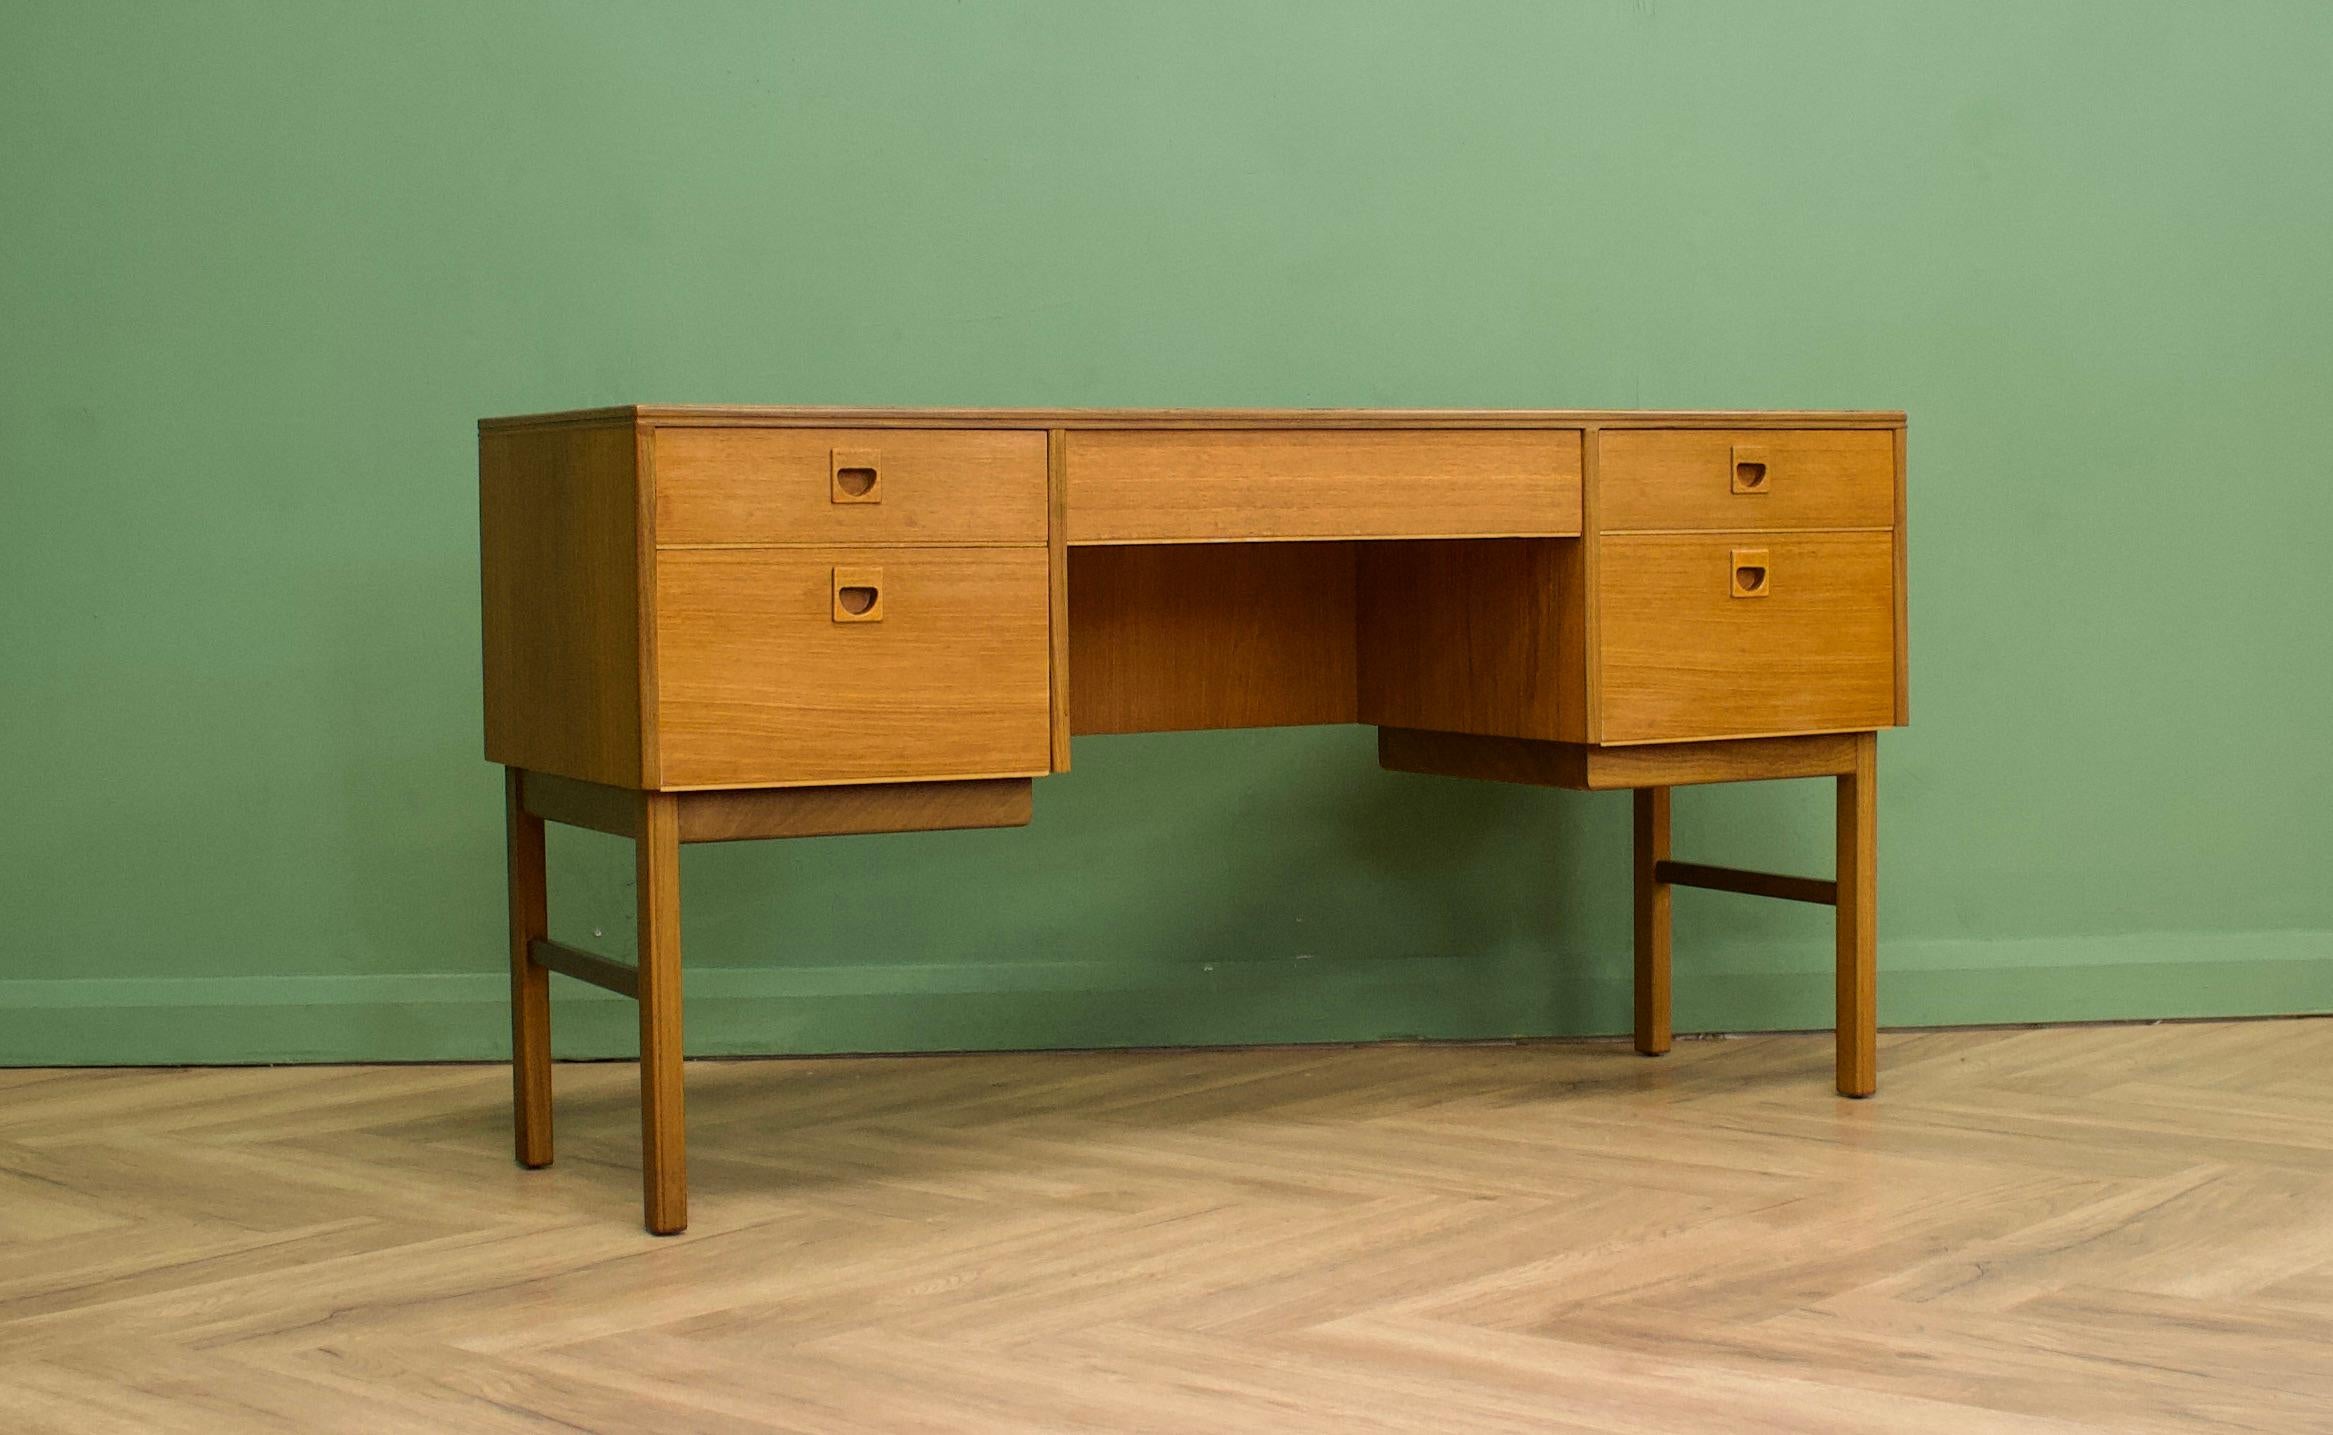 A beautiful quality walnut and teak dressing table by Alfred Cox - these pieces were usually retailed through Heals department store during the 1950s and 1960s
Featuring five drawers, with solid wood flush design handles


This dressing table could